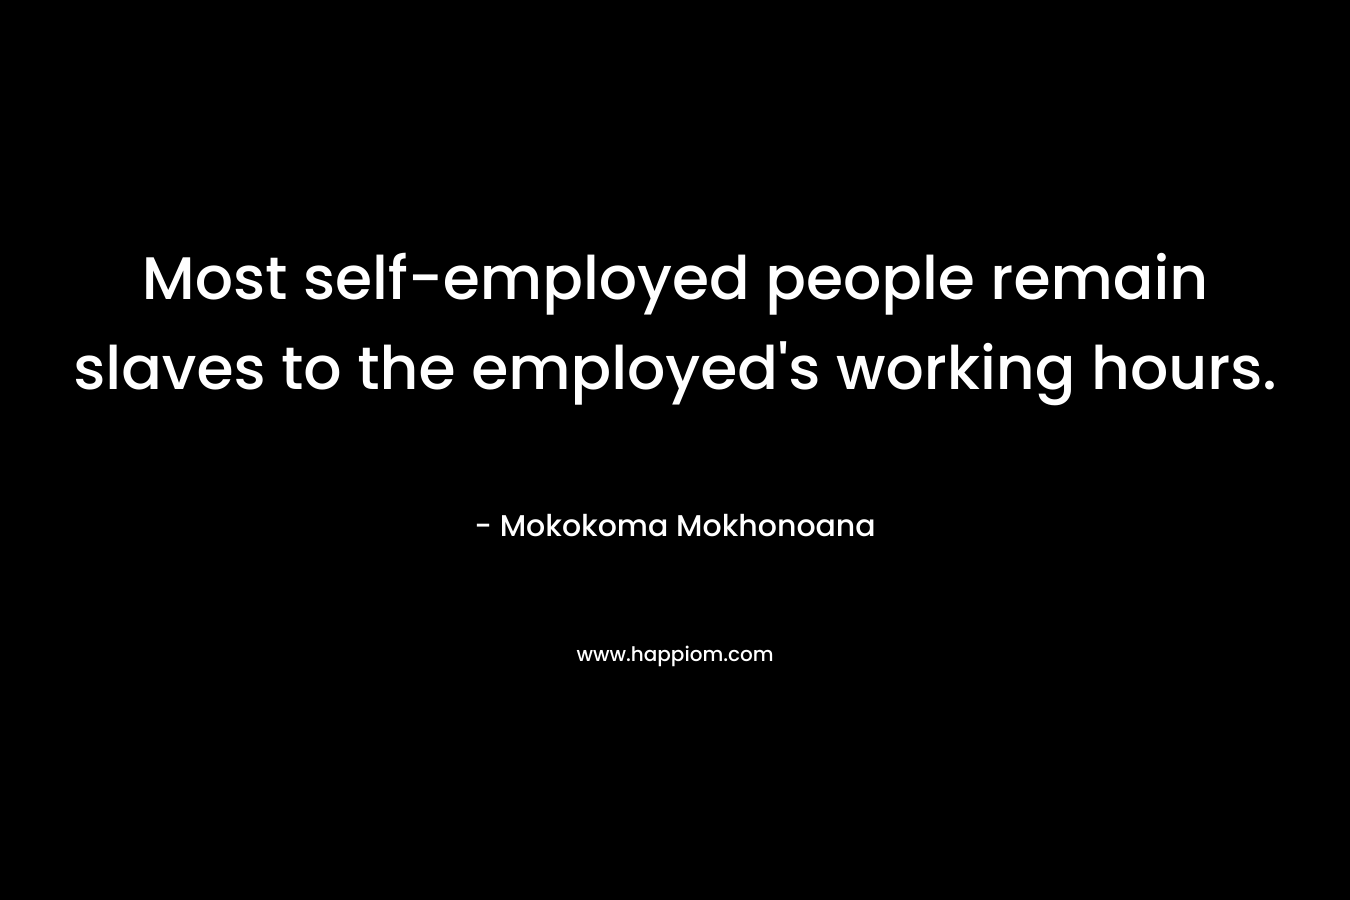 Most self-employed people remain slaves to the employed's working hours.